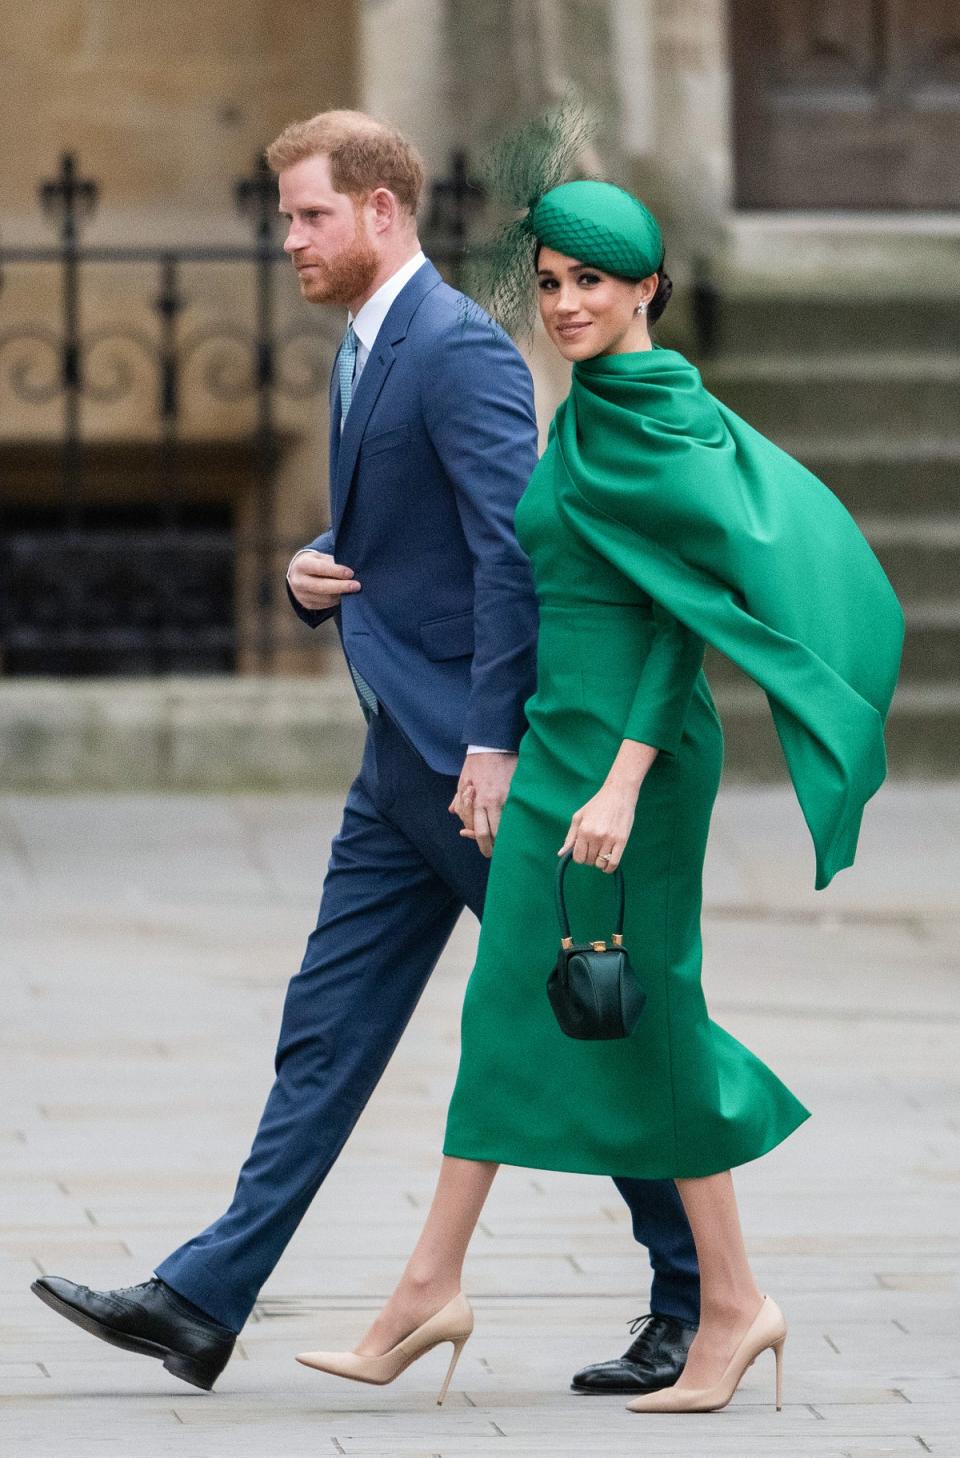 Meghan was a vision in green at the Commonwealth Day Service (Gareth Cattermole/Getty Images)